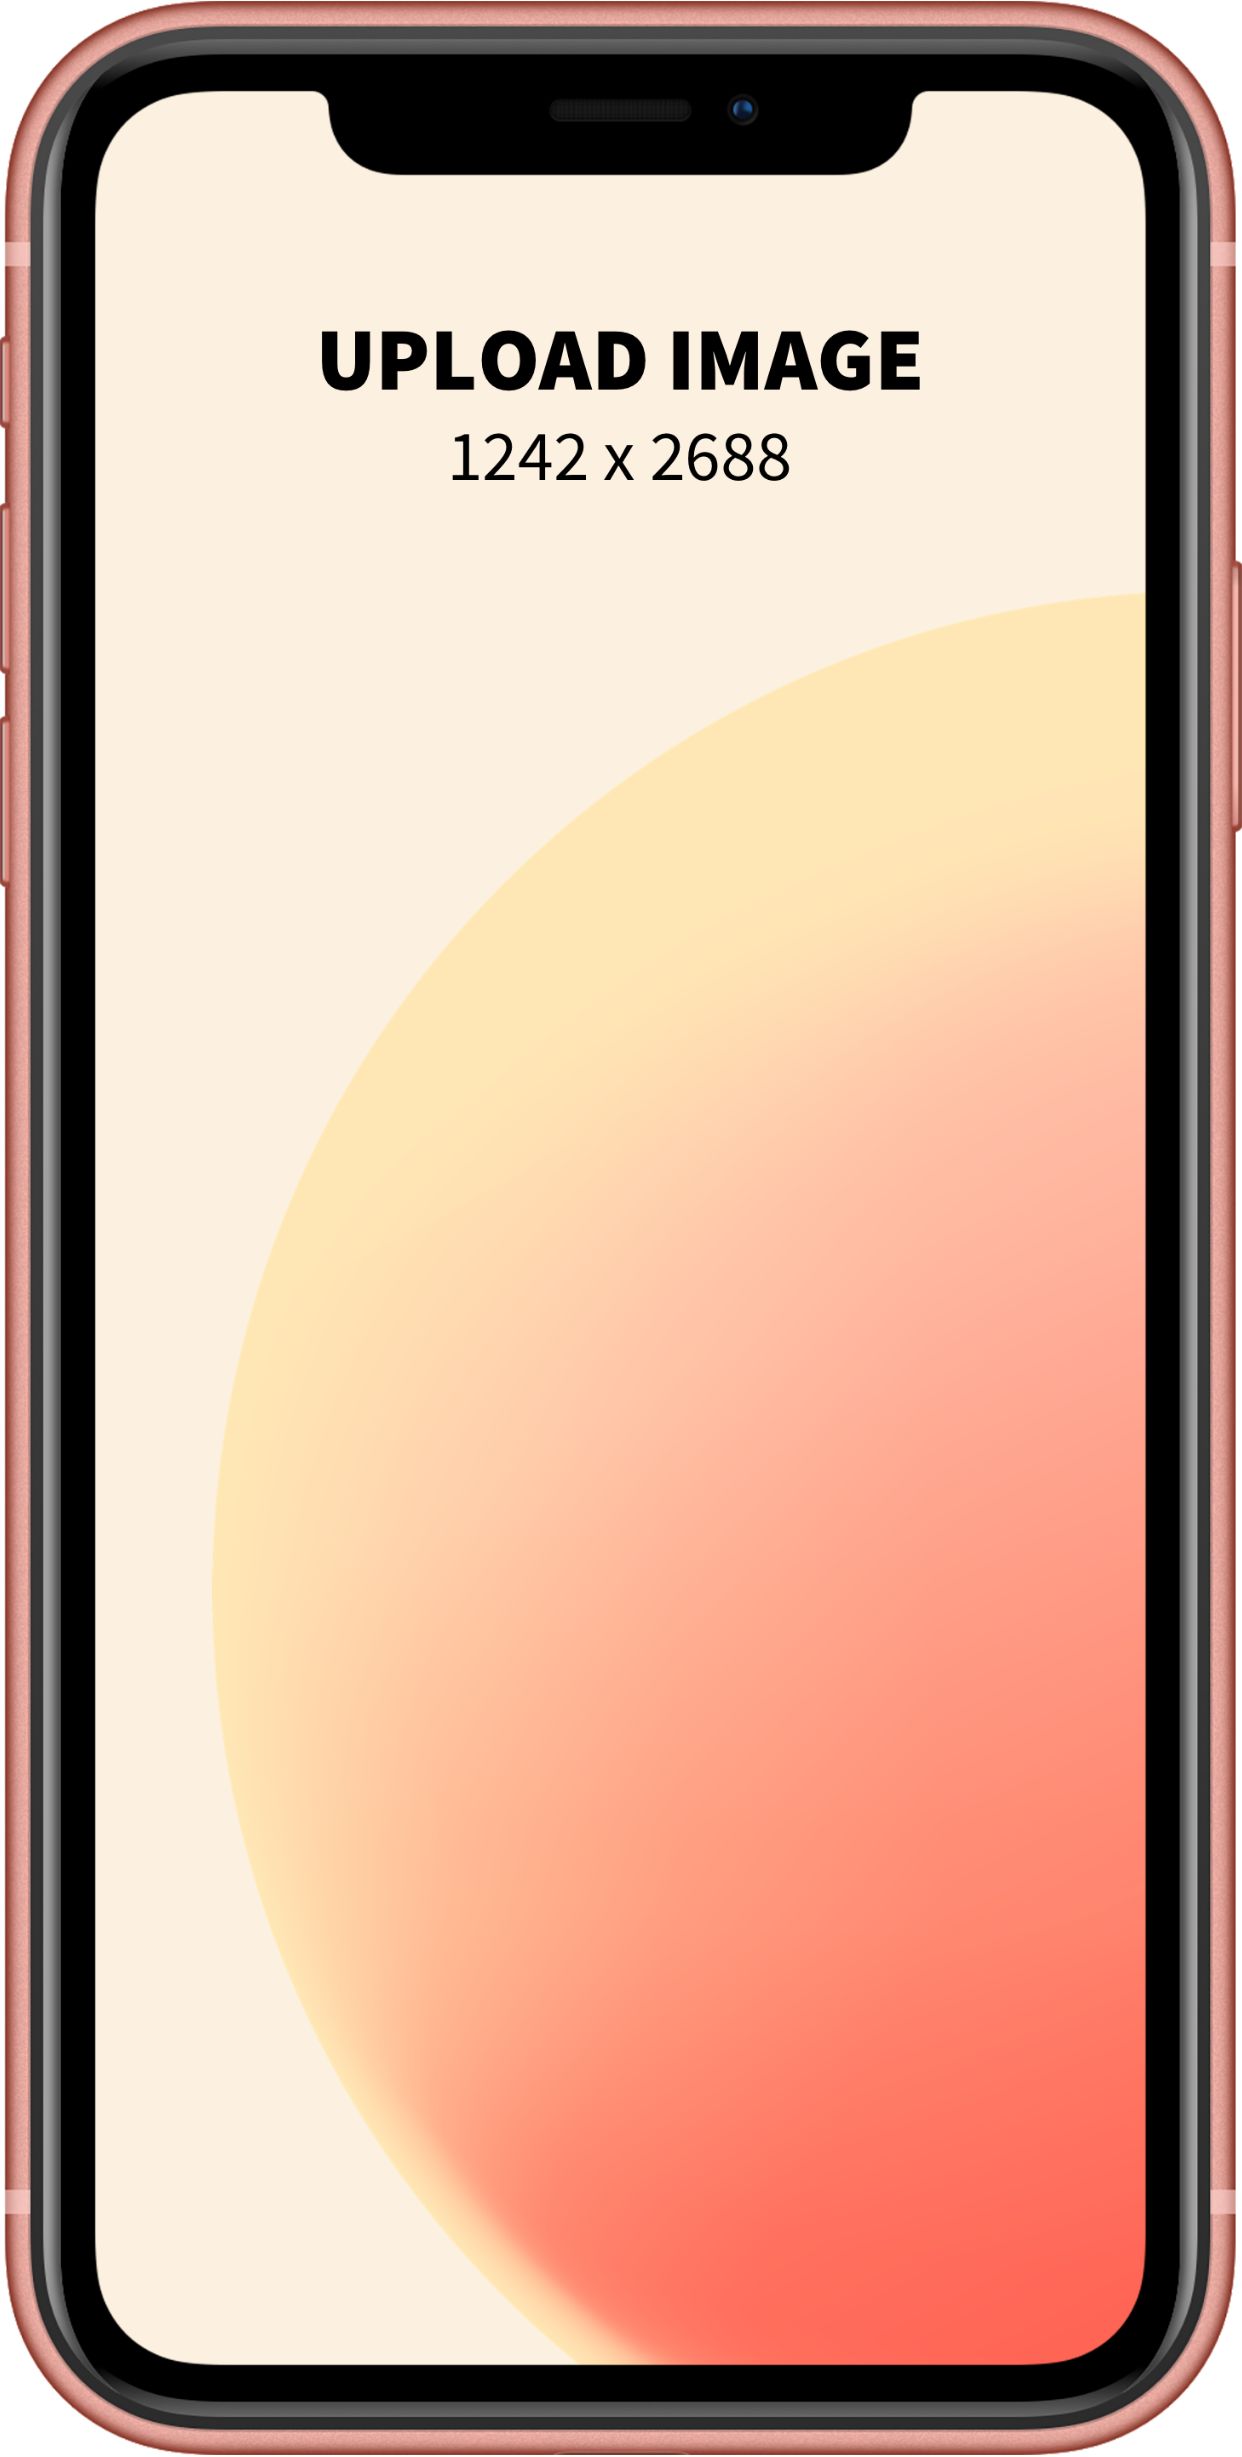 iPhone XS Max Mockup 6 template. Quickly edit text, colors, images, and more for free.